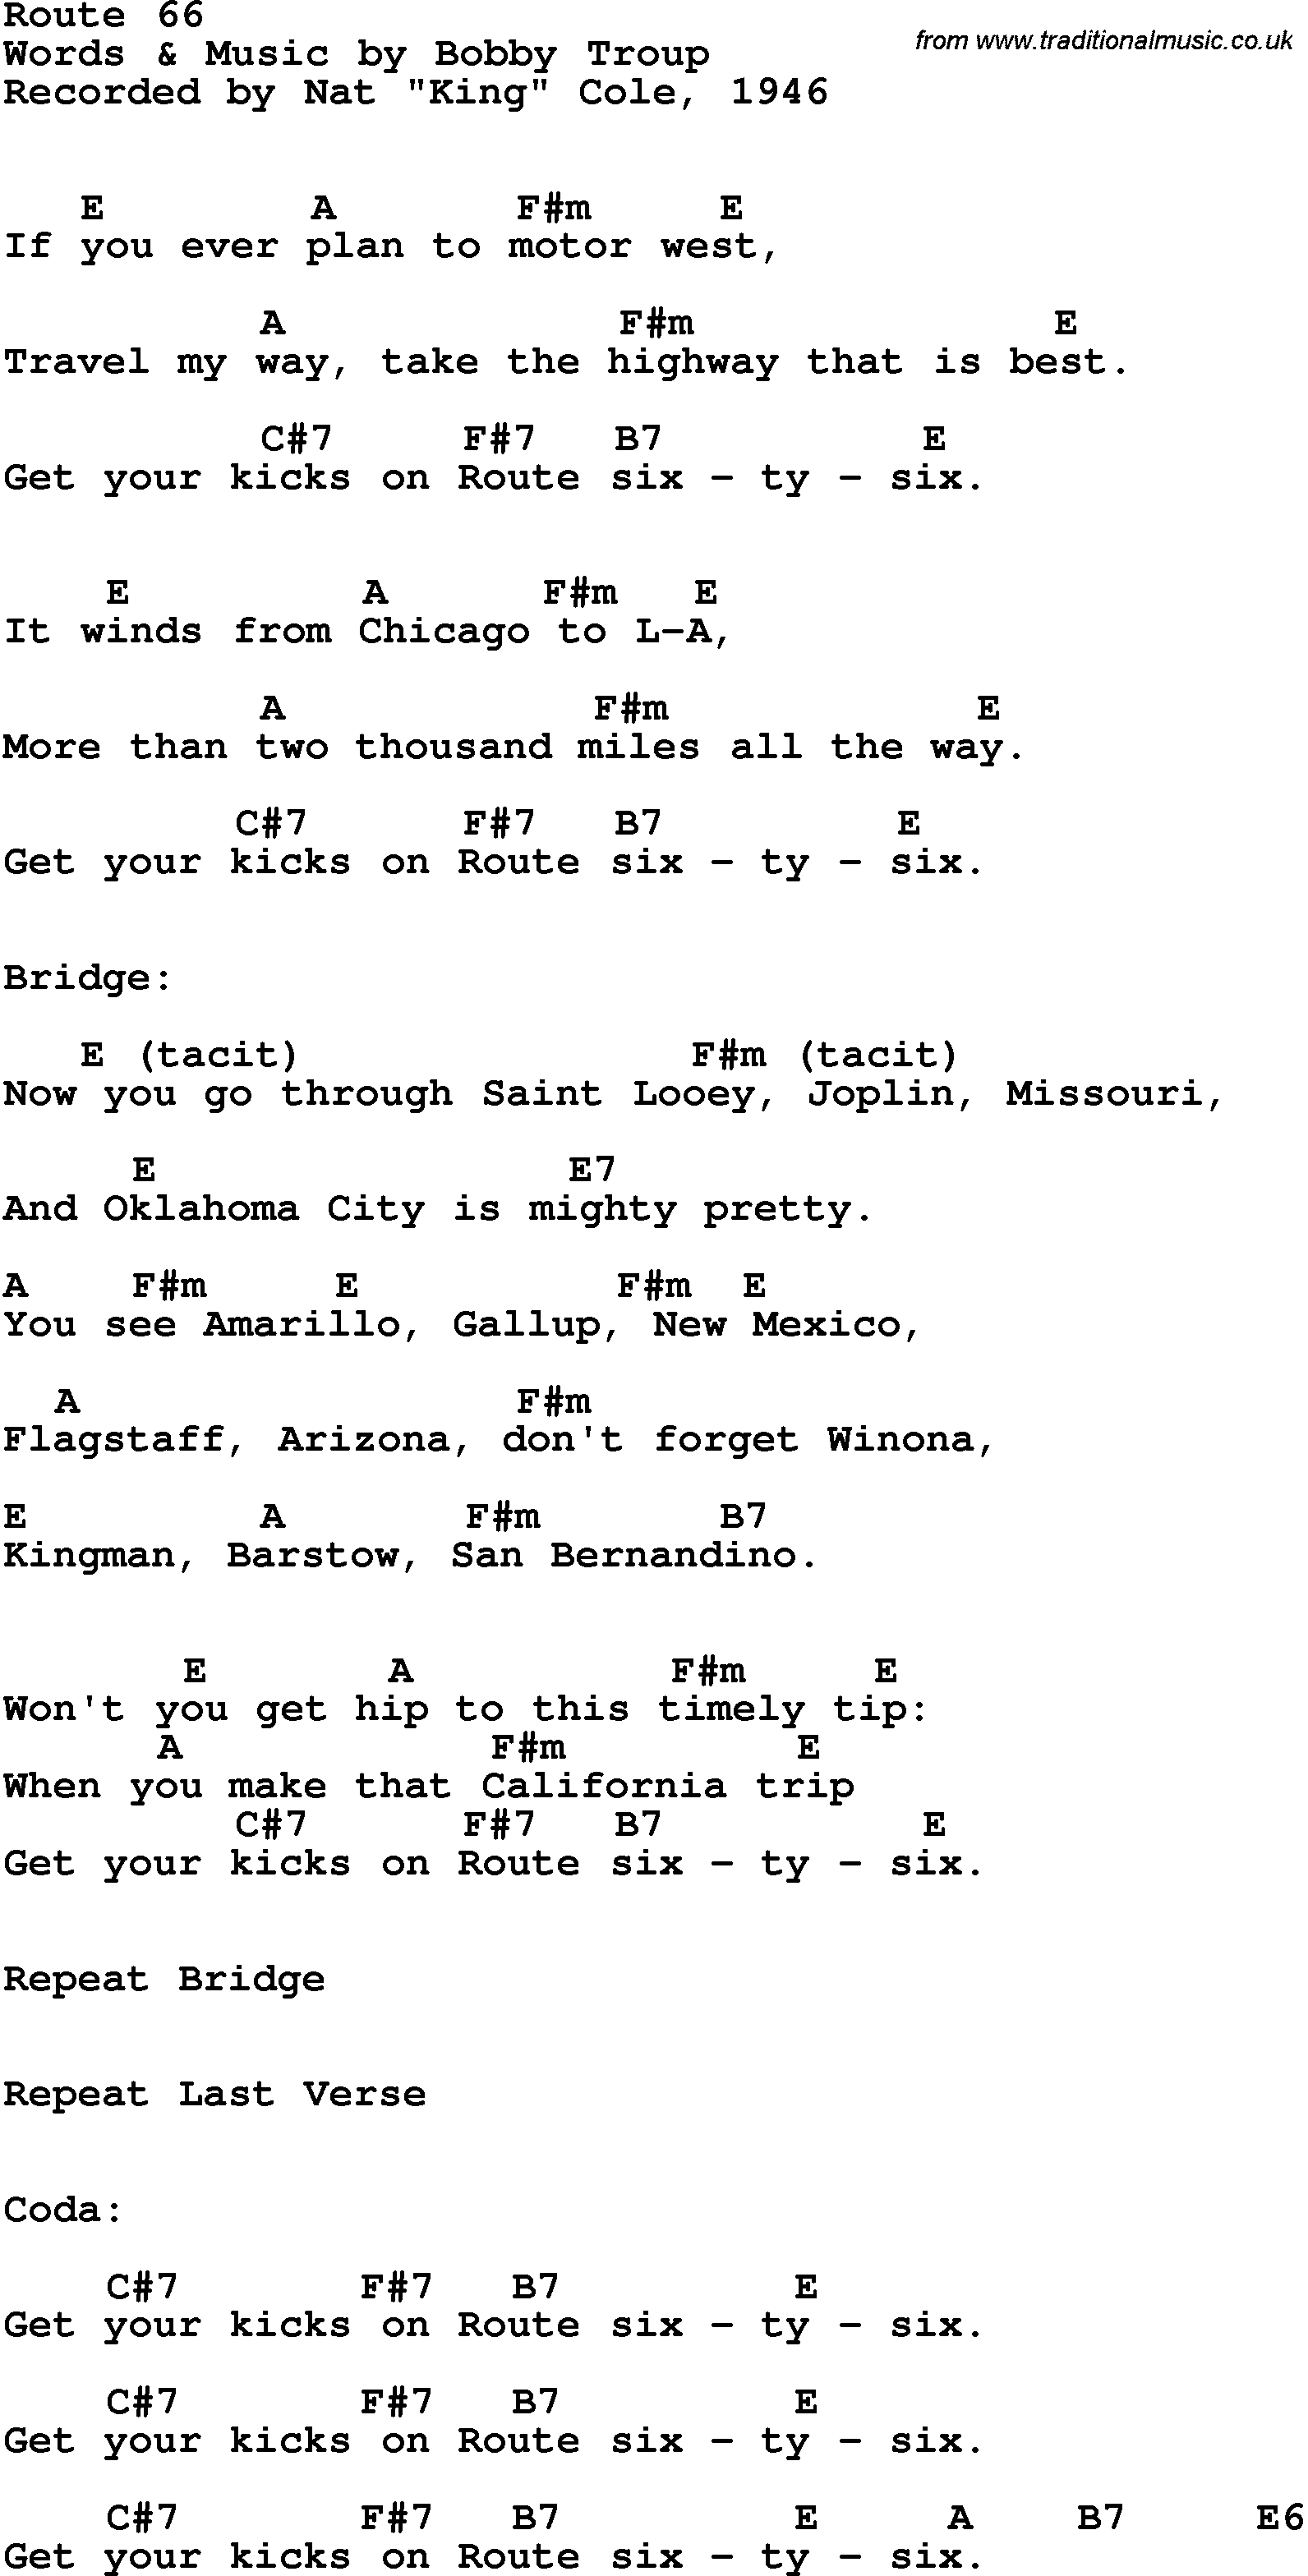 Song Lyrics with guitar chords for Route 66 - Nat King Cole, 1946